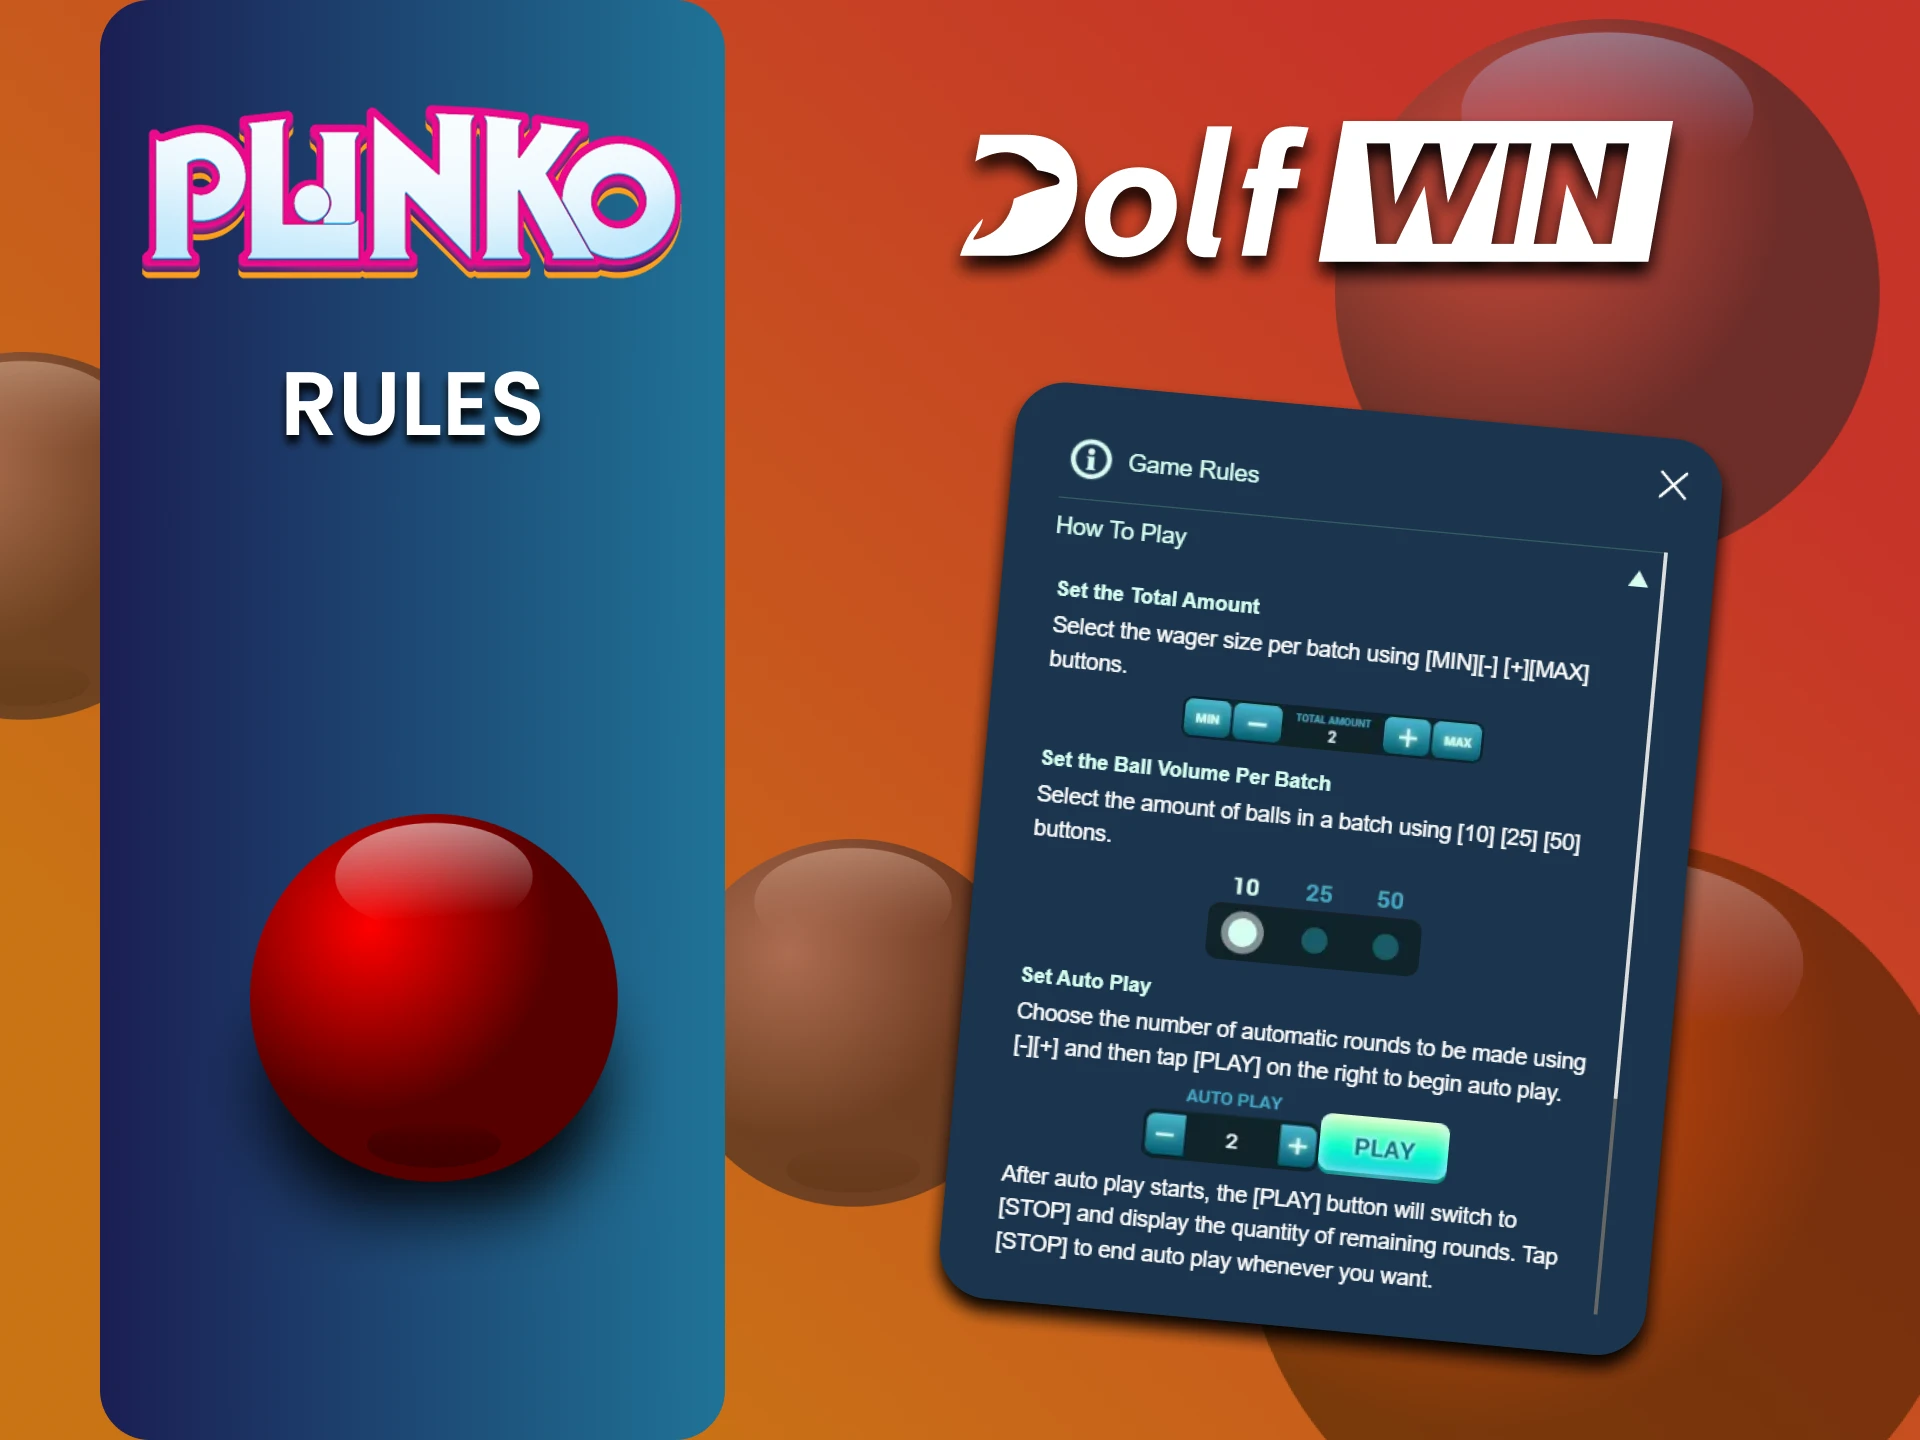 Be sure to study the rules of the Plinko game on the Dolfwin website.